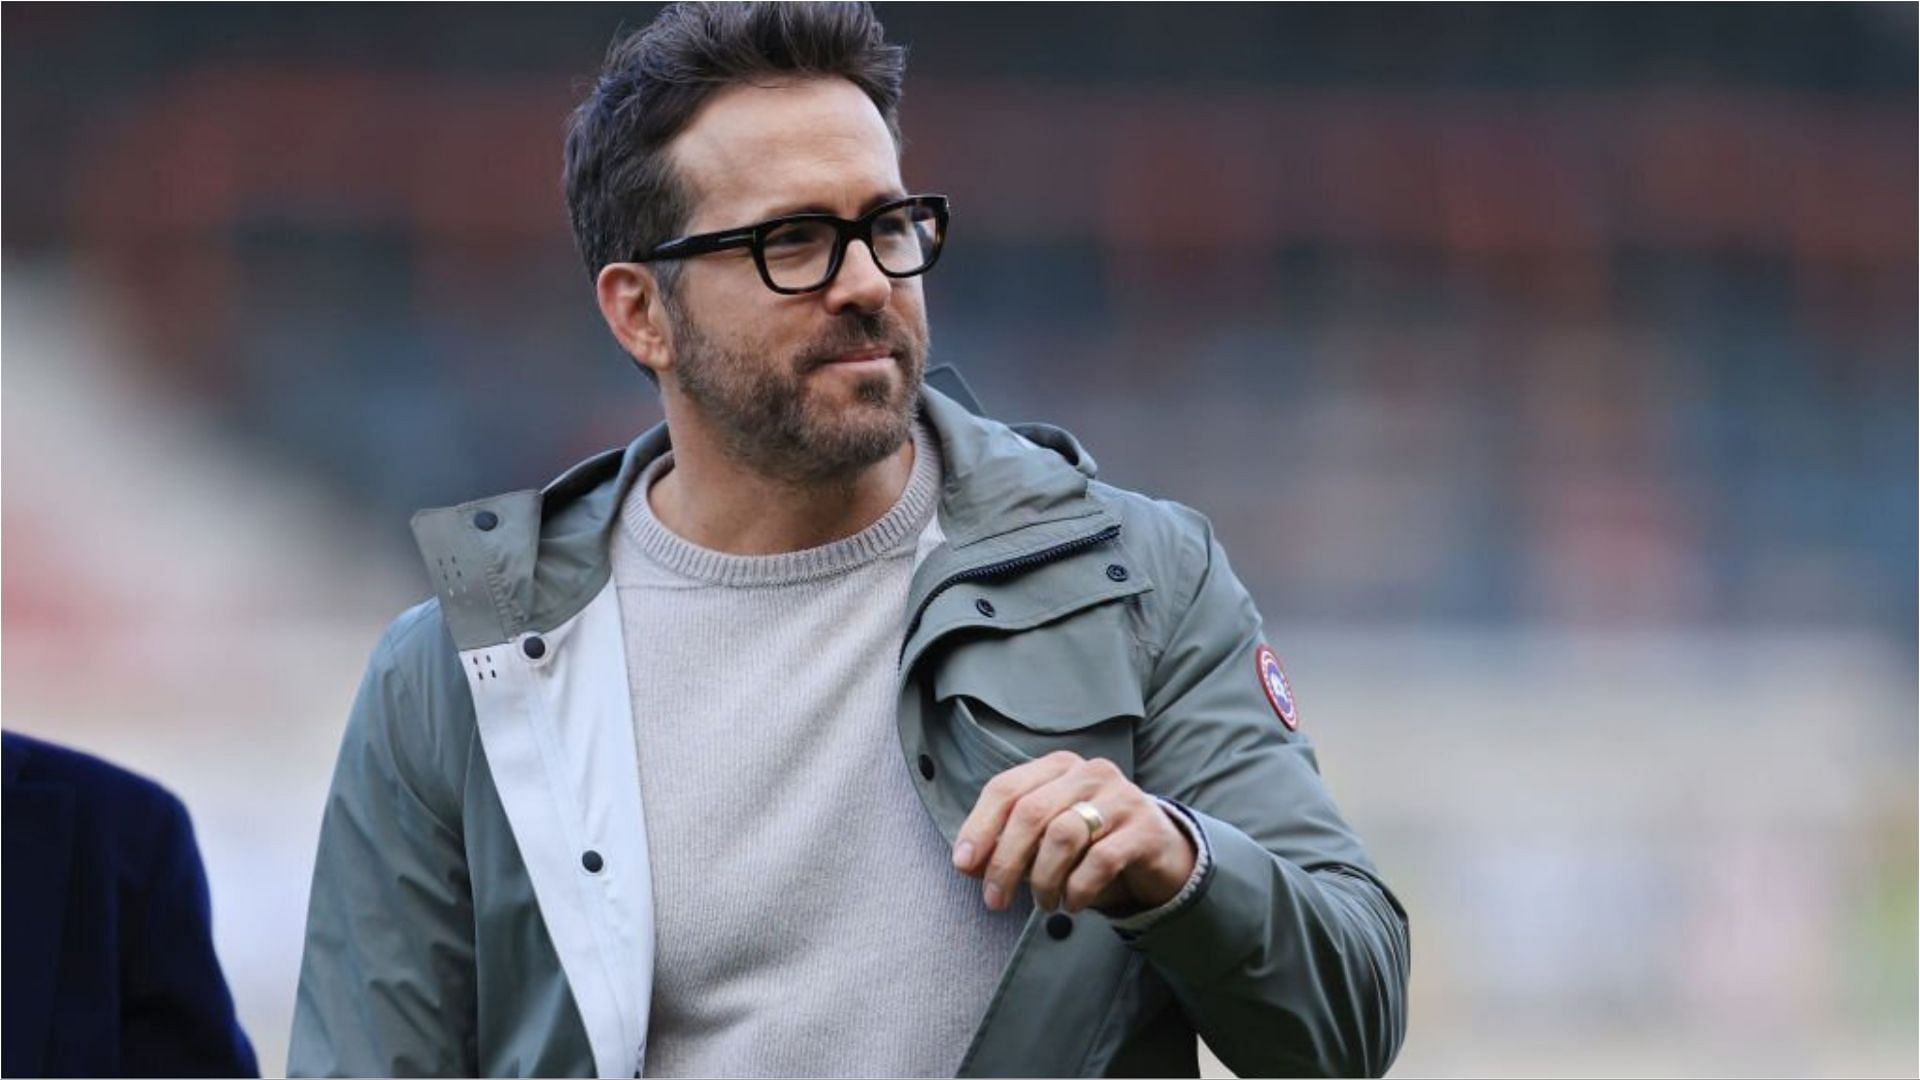 Mint Mobile revealed in 2019 that Ryan Reynolds became the owner (Image via Simon Stacpoole/Getty Images)